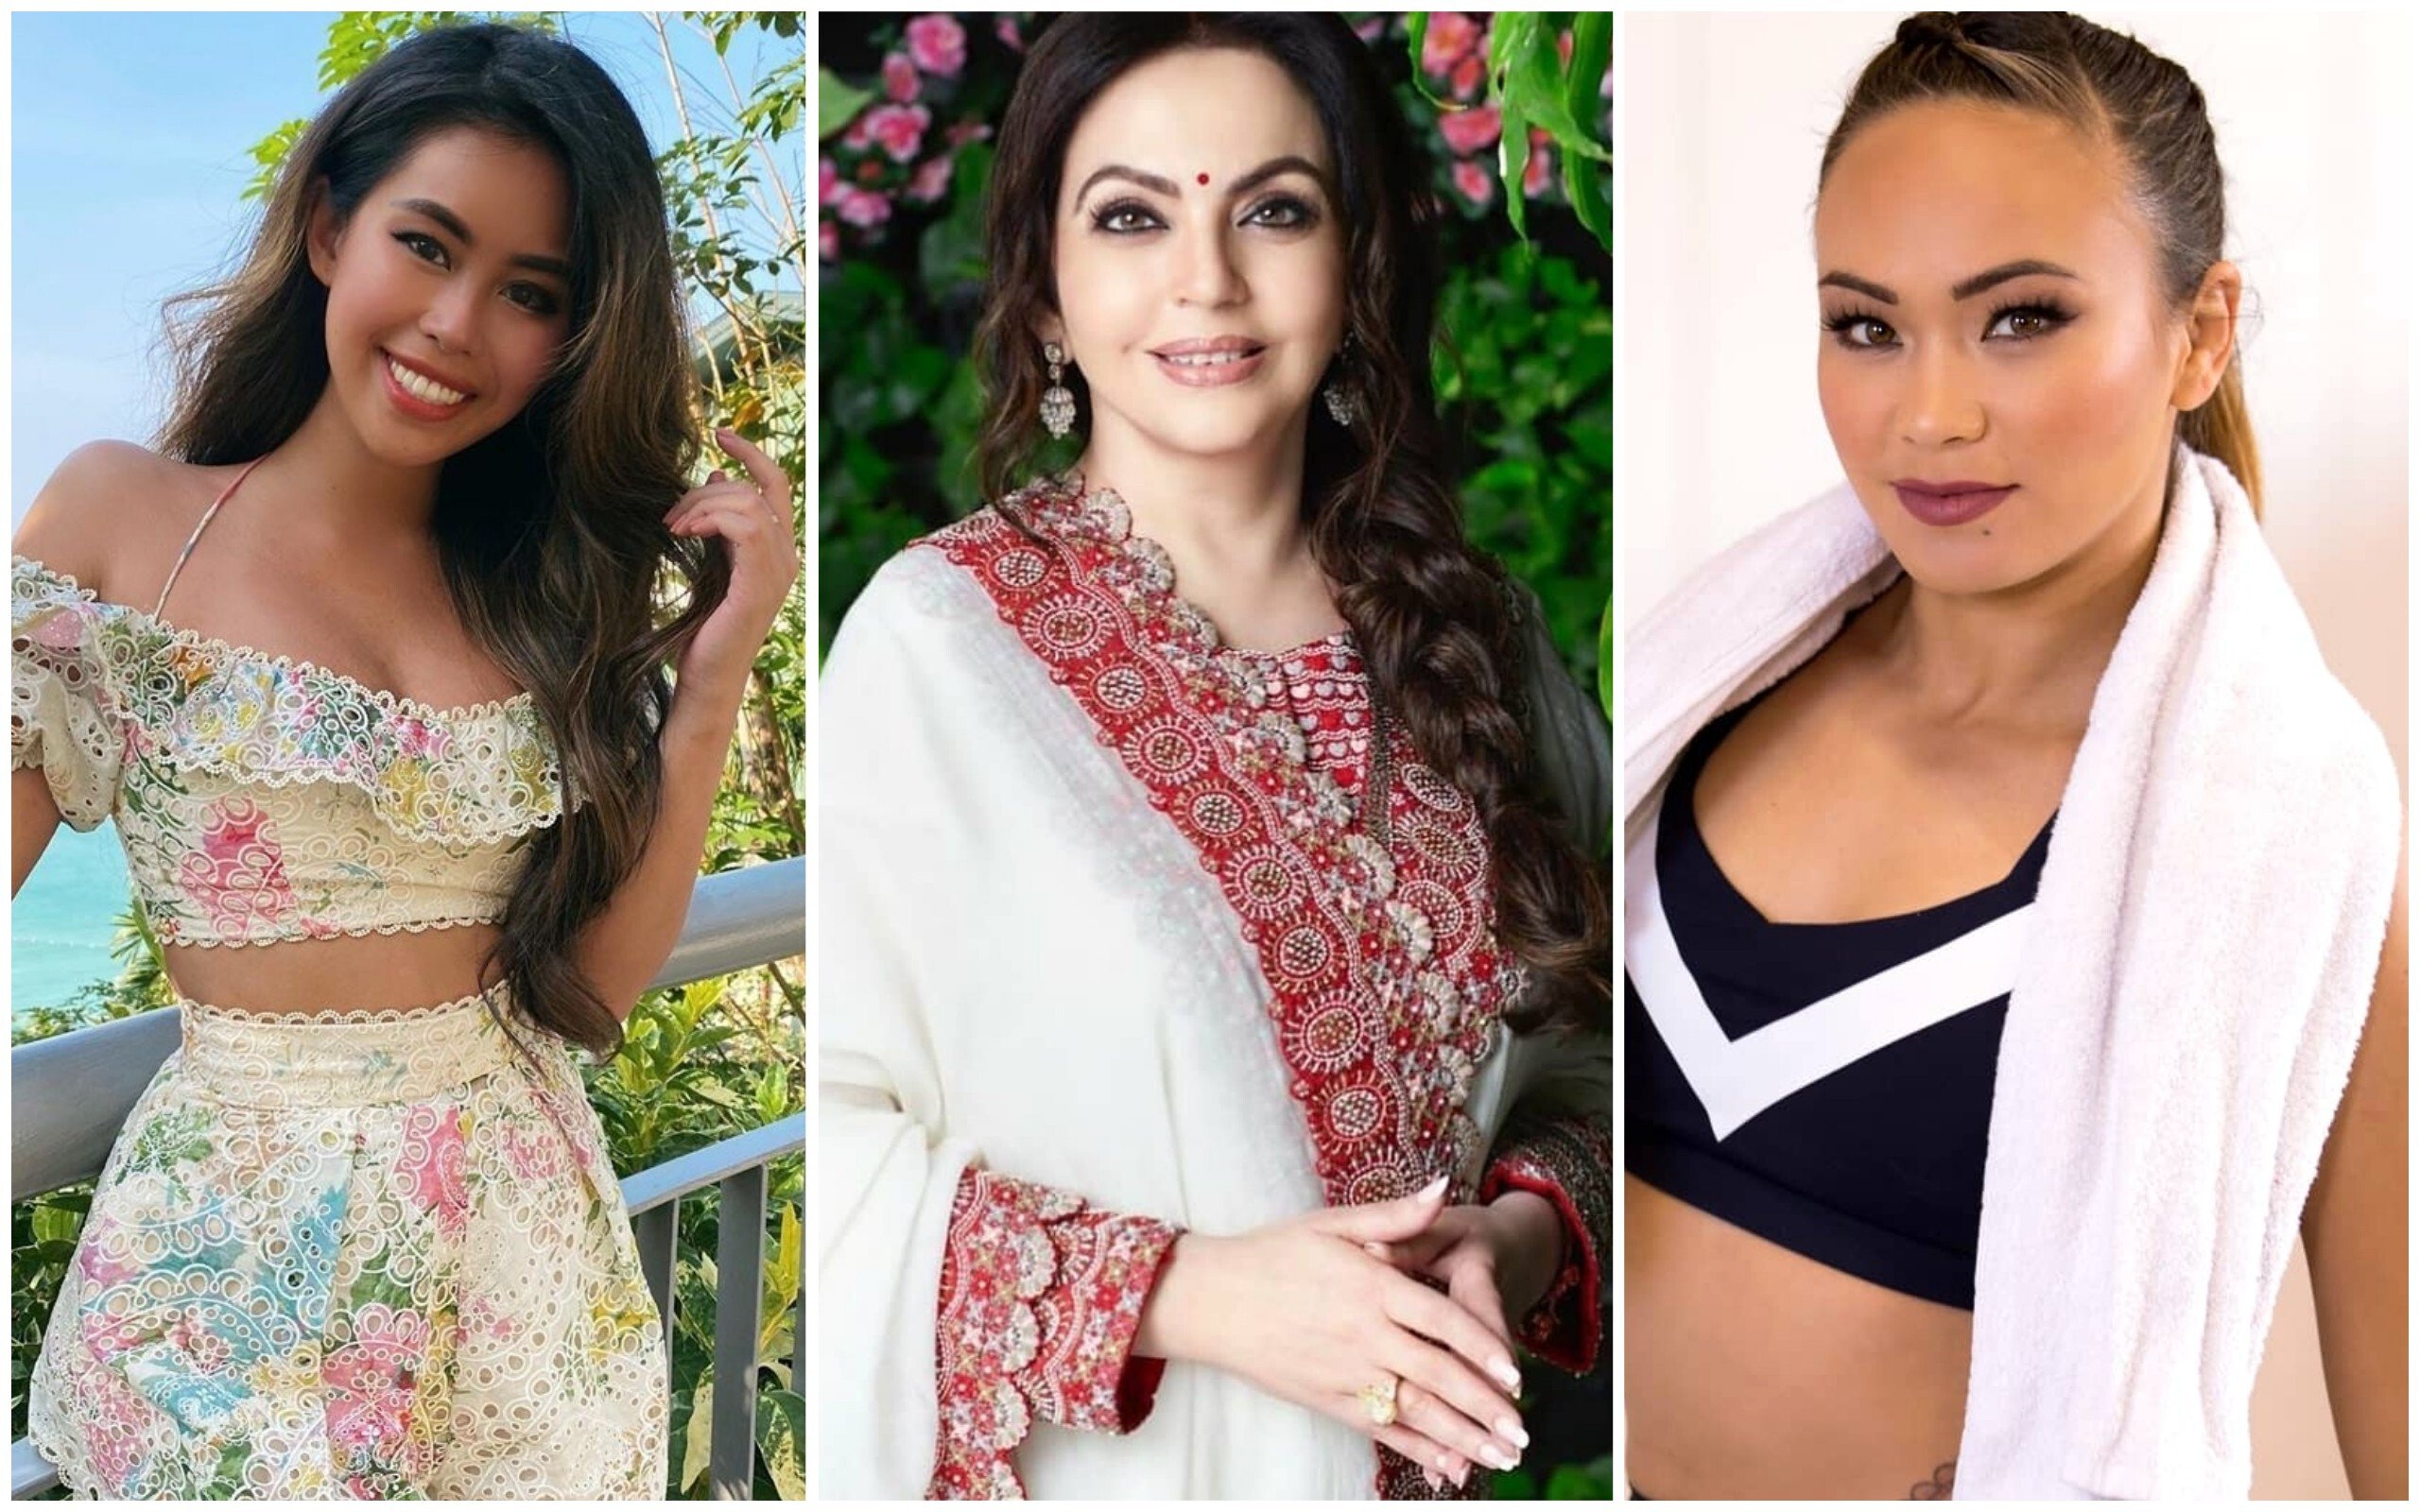 Tien Nguyen, Nita Ambani and Michelle Waterson all made headlines this month – here’s how. Photo: Instagram